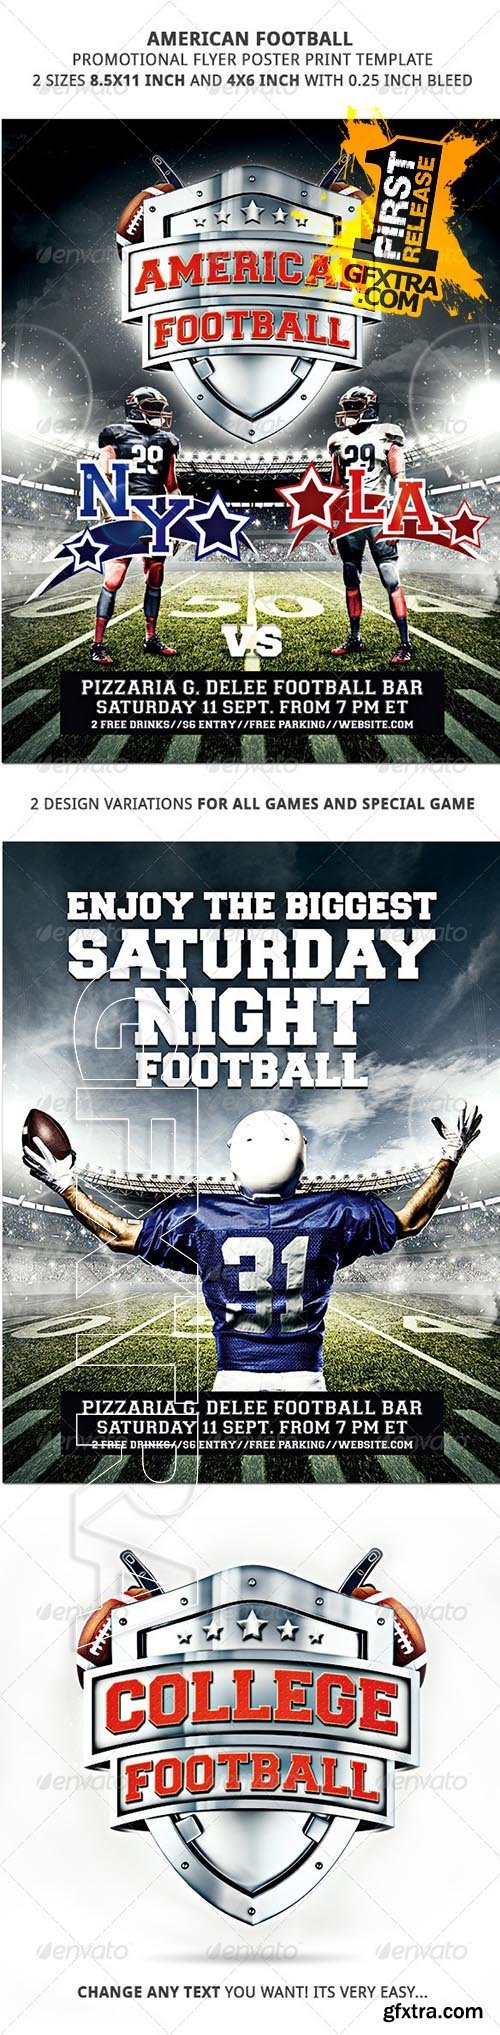 Graphicriver American Football Promotional Flyer Poster 2 Sizes 8603931